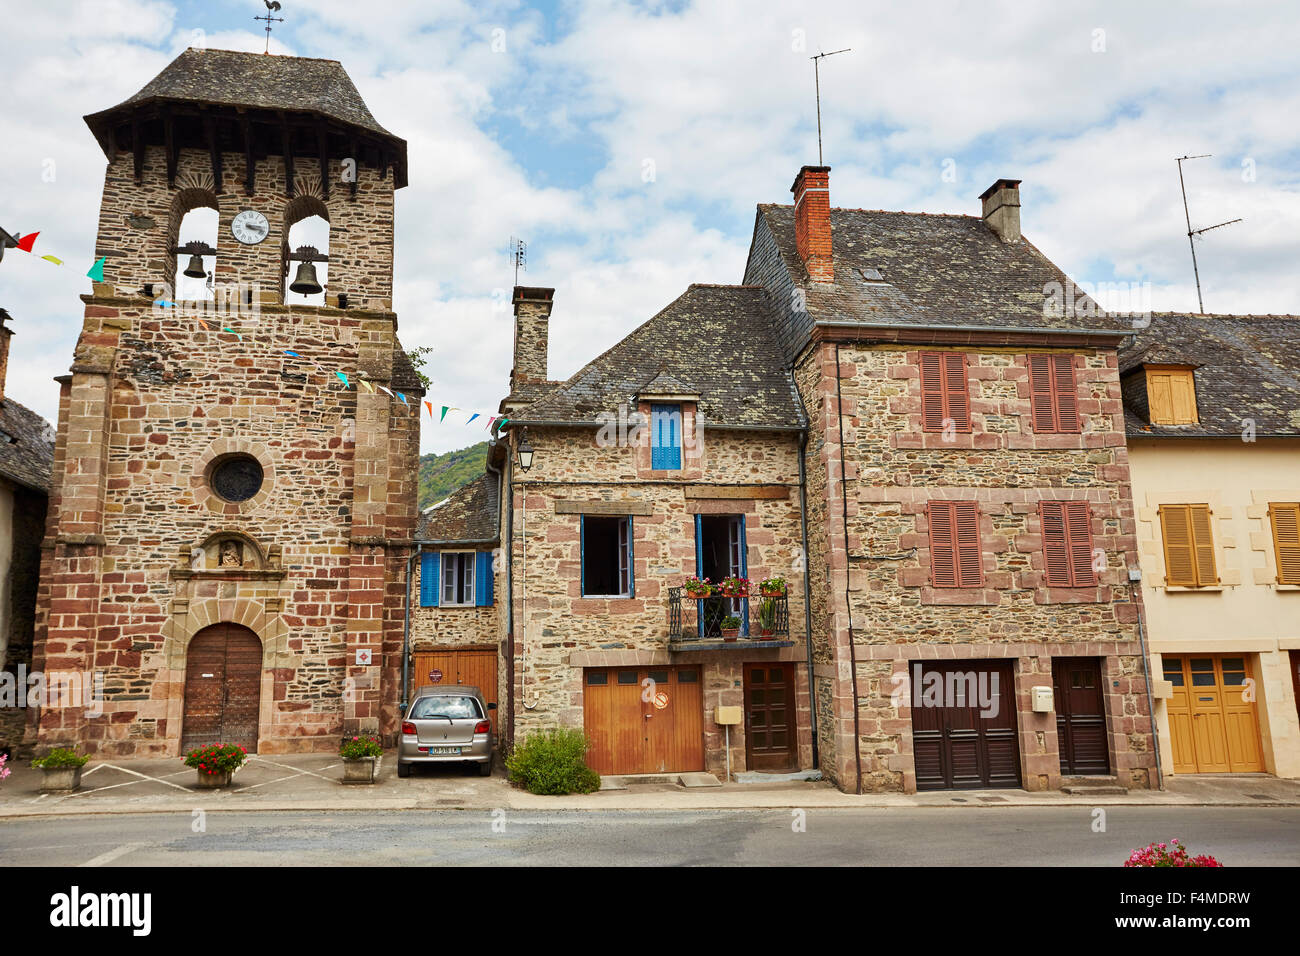 Church and neighboring buildings in Le Saillant, Correze, Limousin, France. Stock Photo